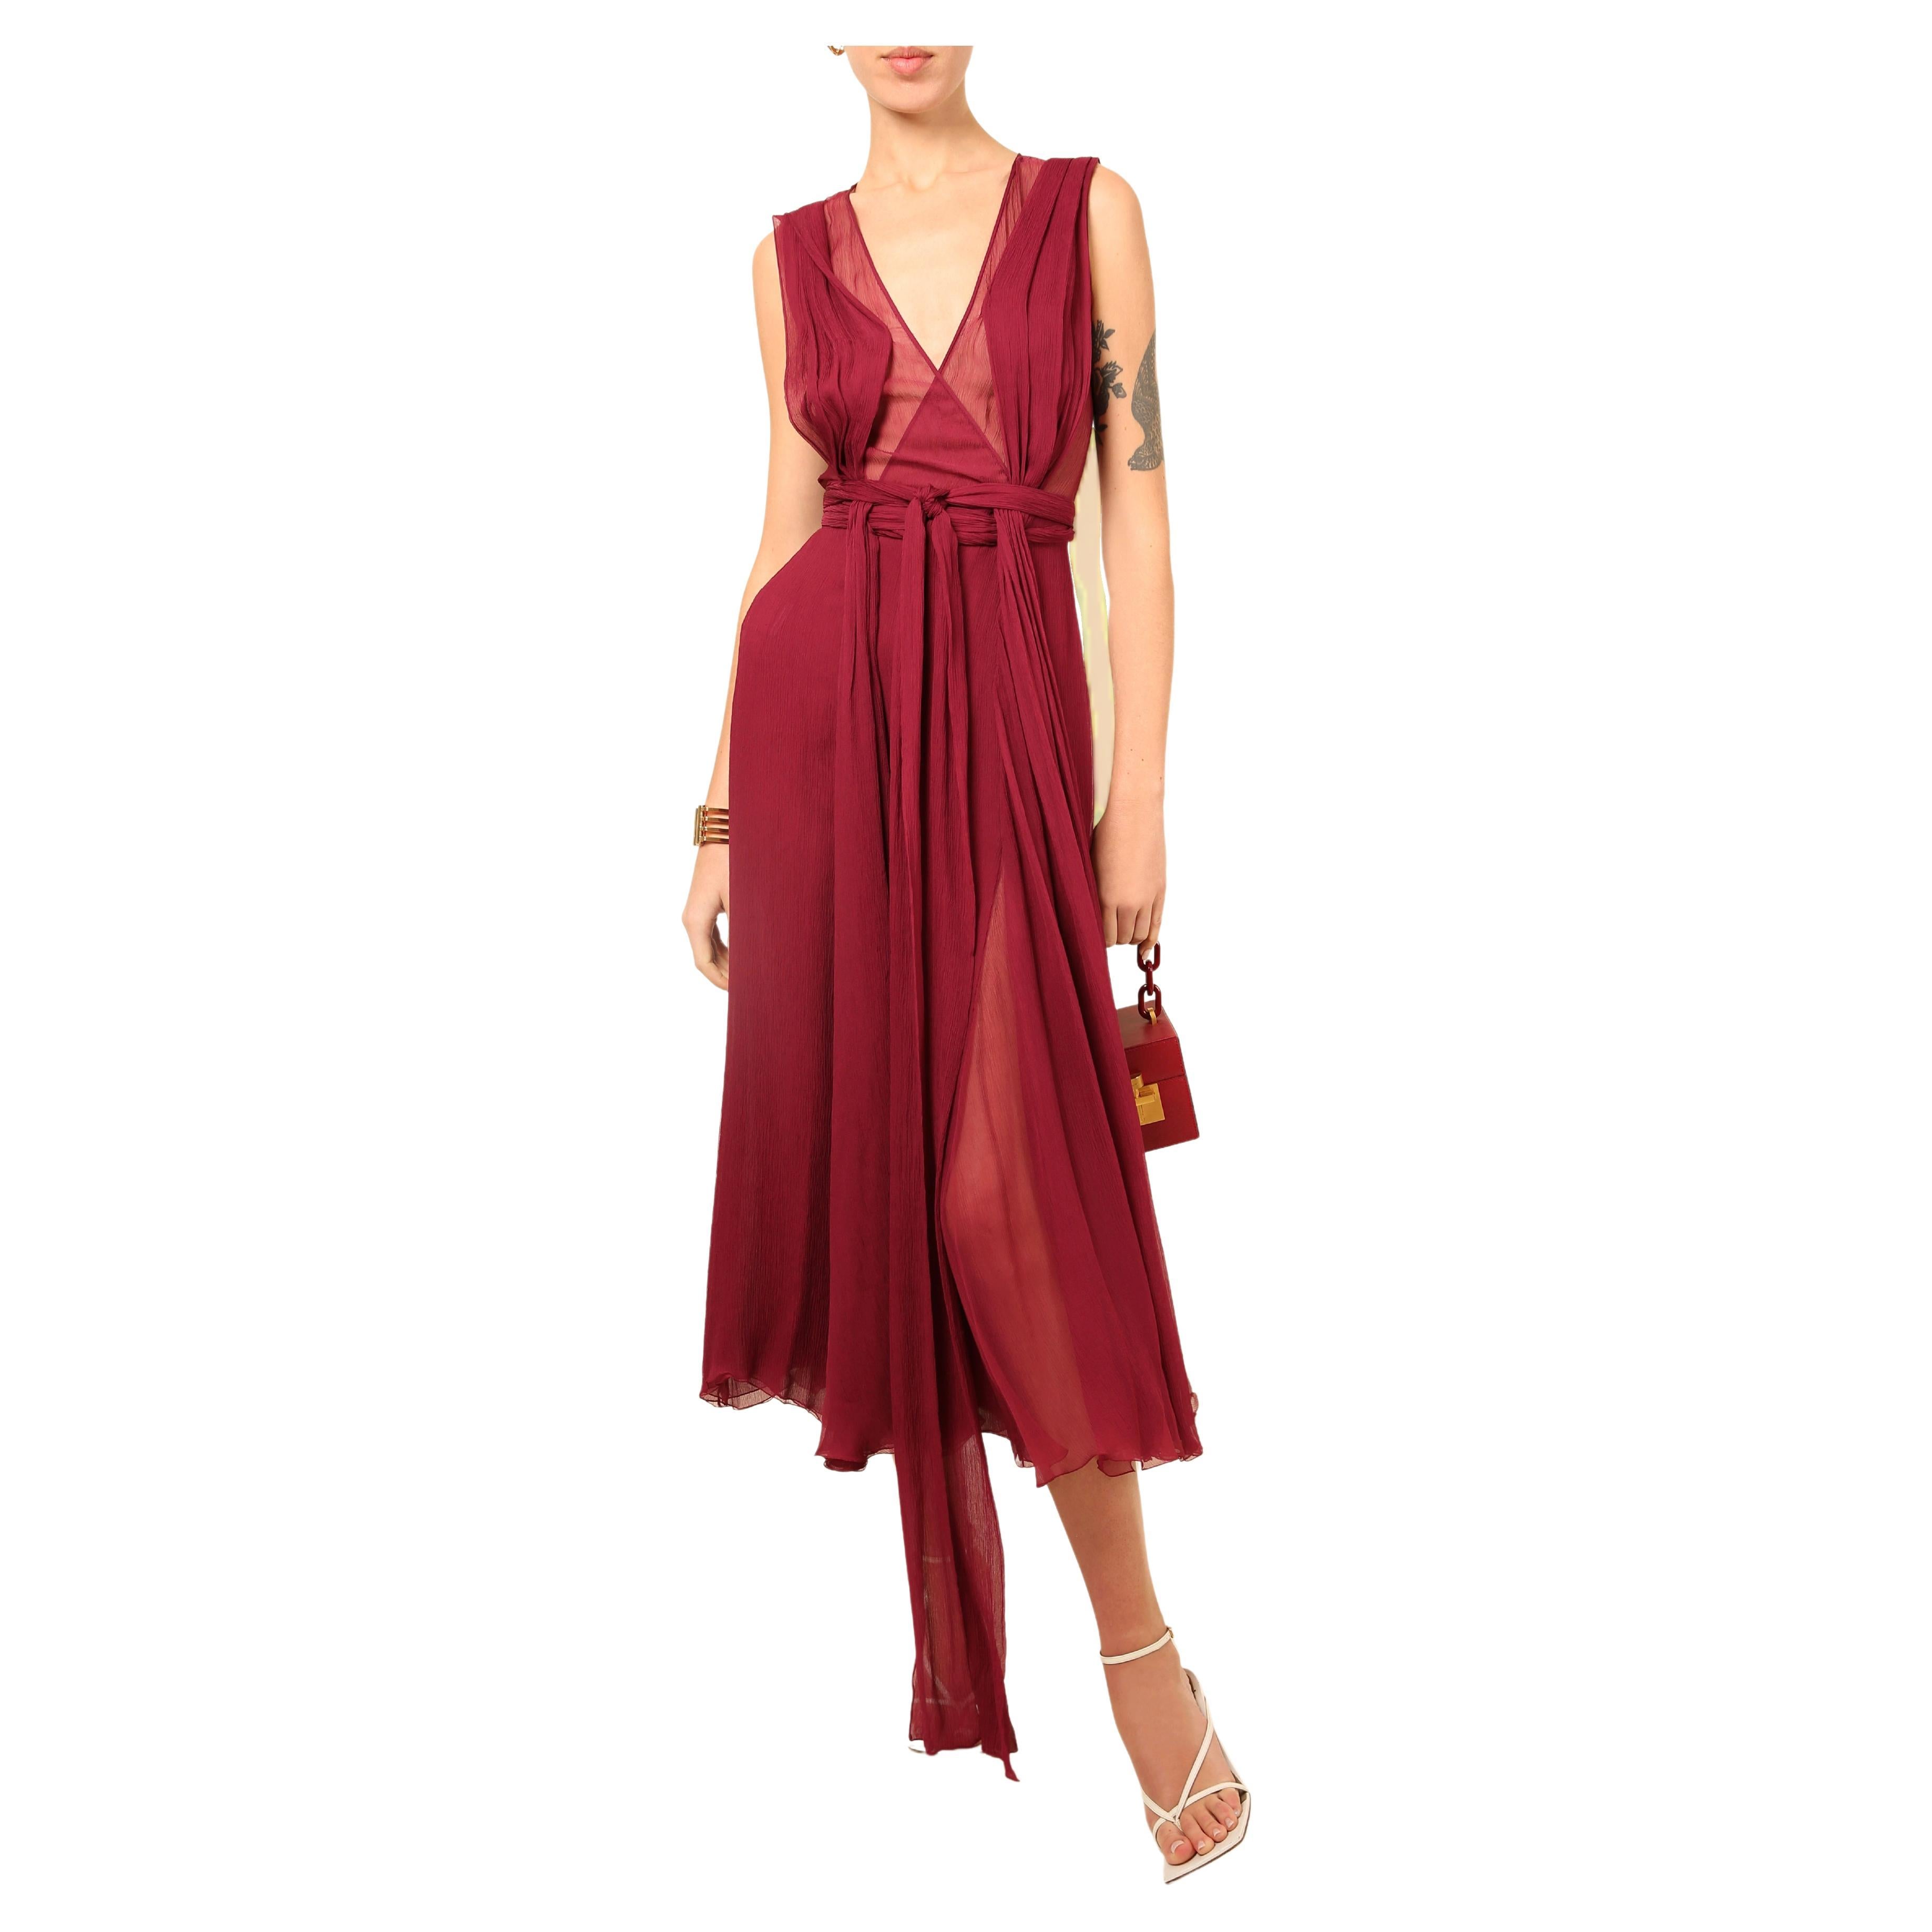 Gucci Fall 2011 burgundy chiffon silk plunging neckline sheer cut out gown dress For Sale